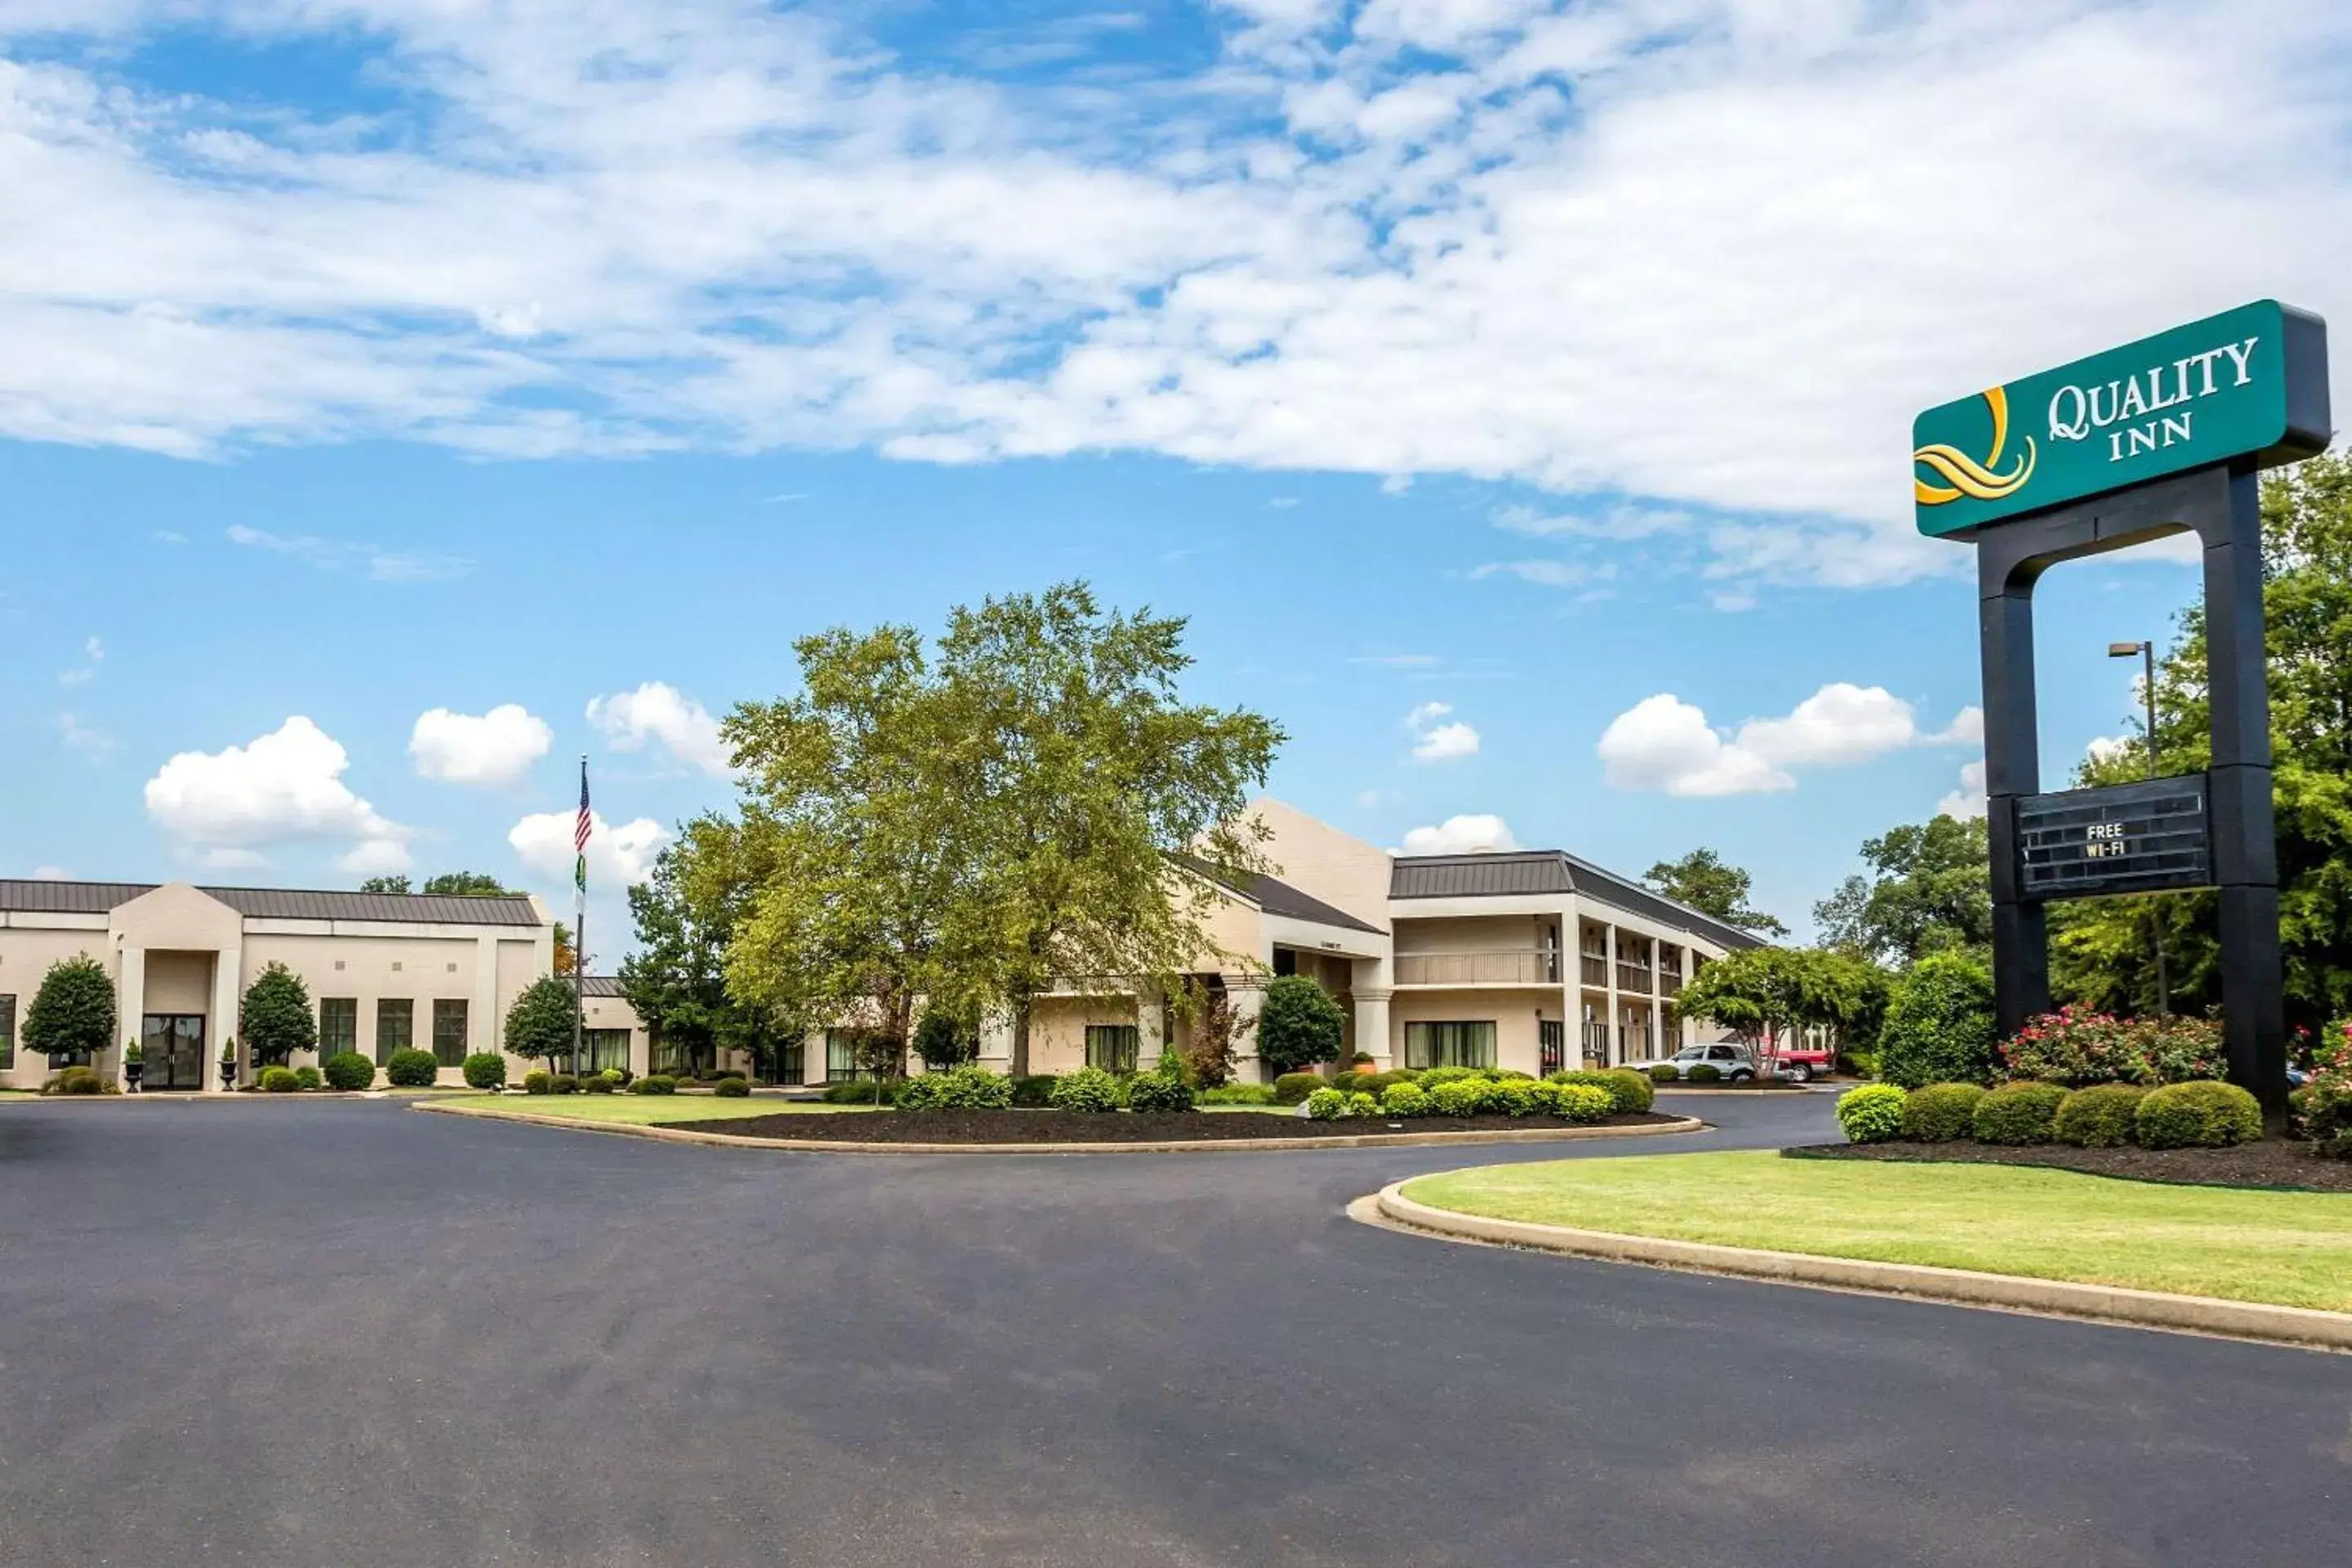 Property Building in Quality Inn Union City US 51